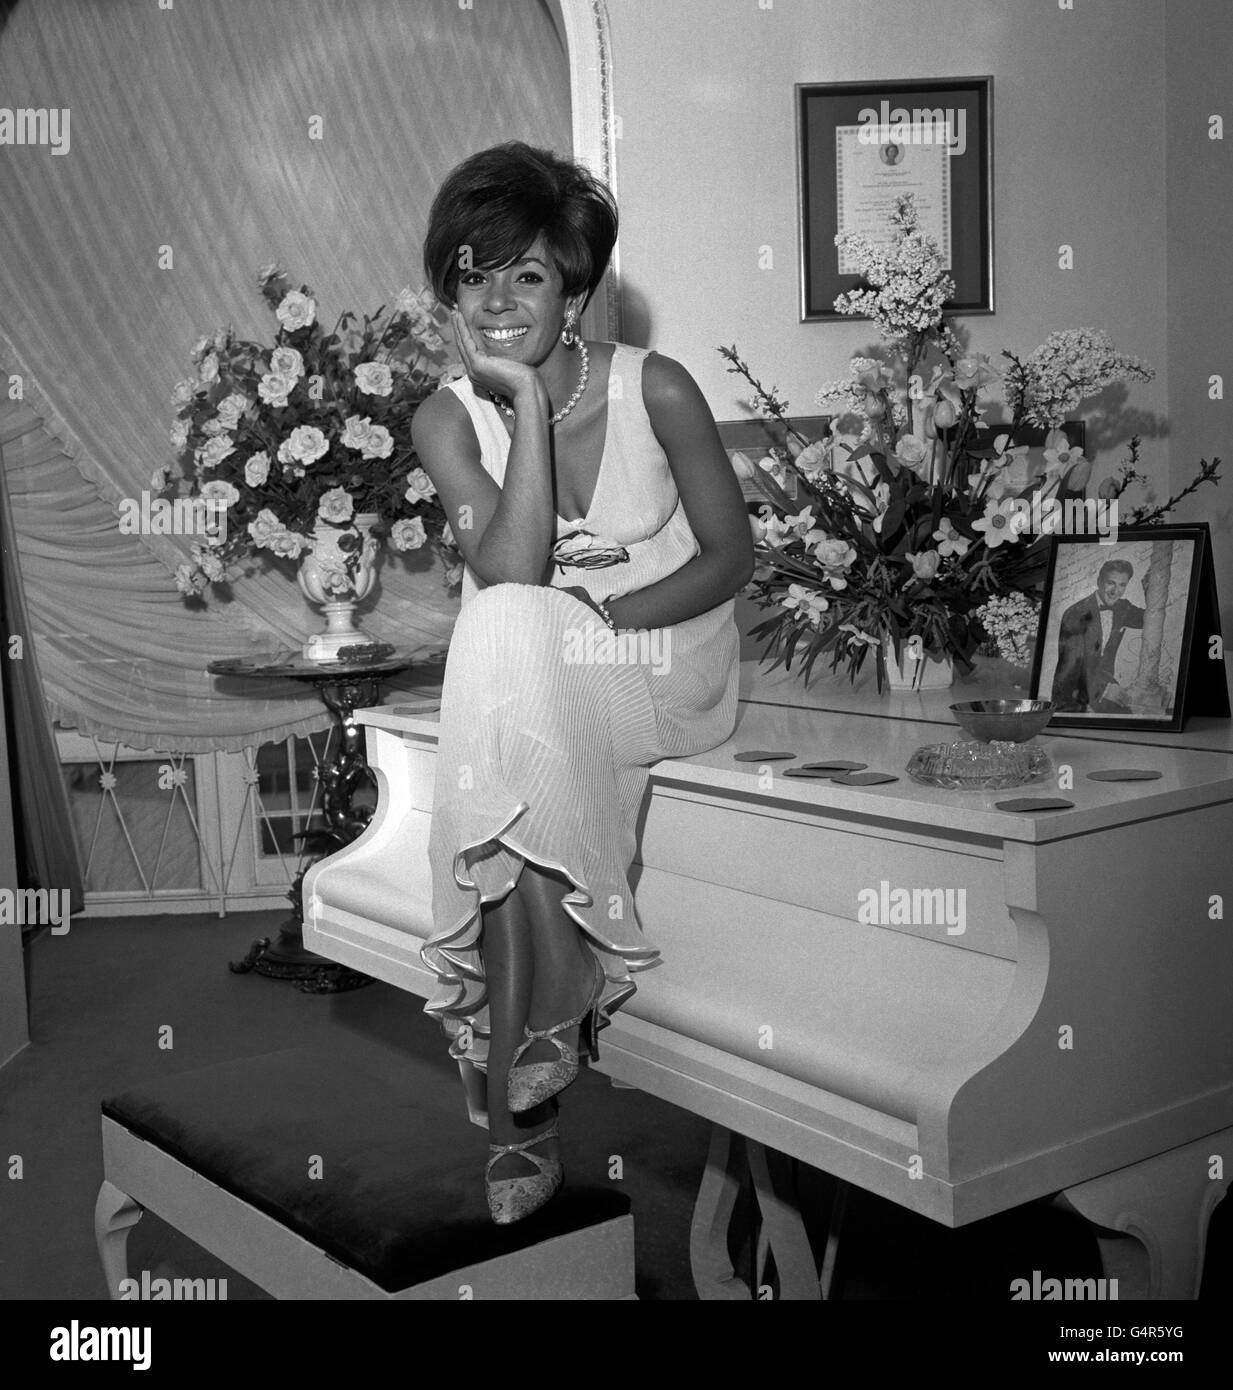 Shirley Bassey, the sultry songstress from Cardiff's Tiger Bay, is shown in the music room of her new home in Chester Square, London, where she announced she would play the title role in 'Josephine', a new musical play by Gavin Lambert and her husband Kenneth Hume. This marks Shirley's first appearance in a major dramatic role, that of Creole-born wife of French Emperor Napolean. Stock Photo